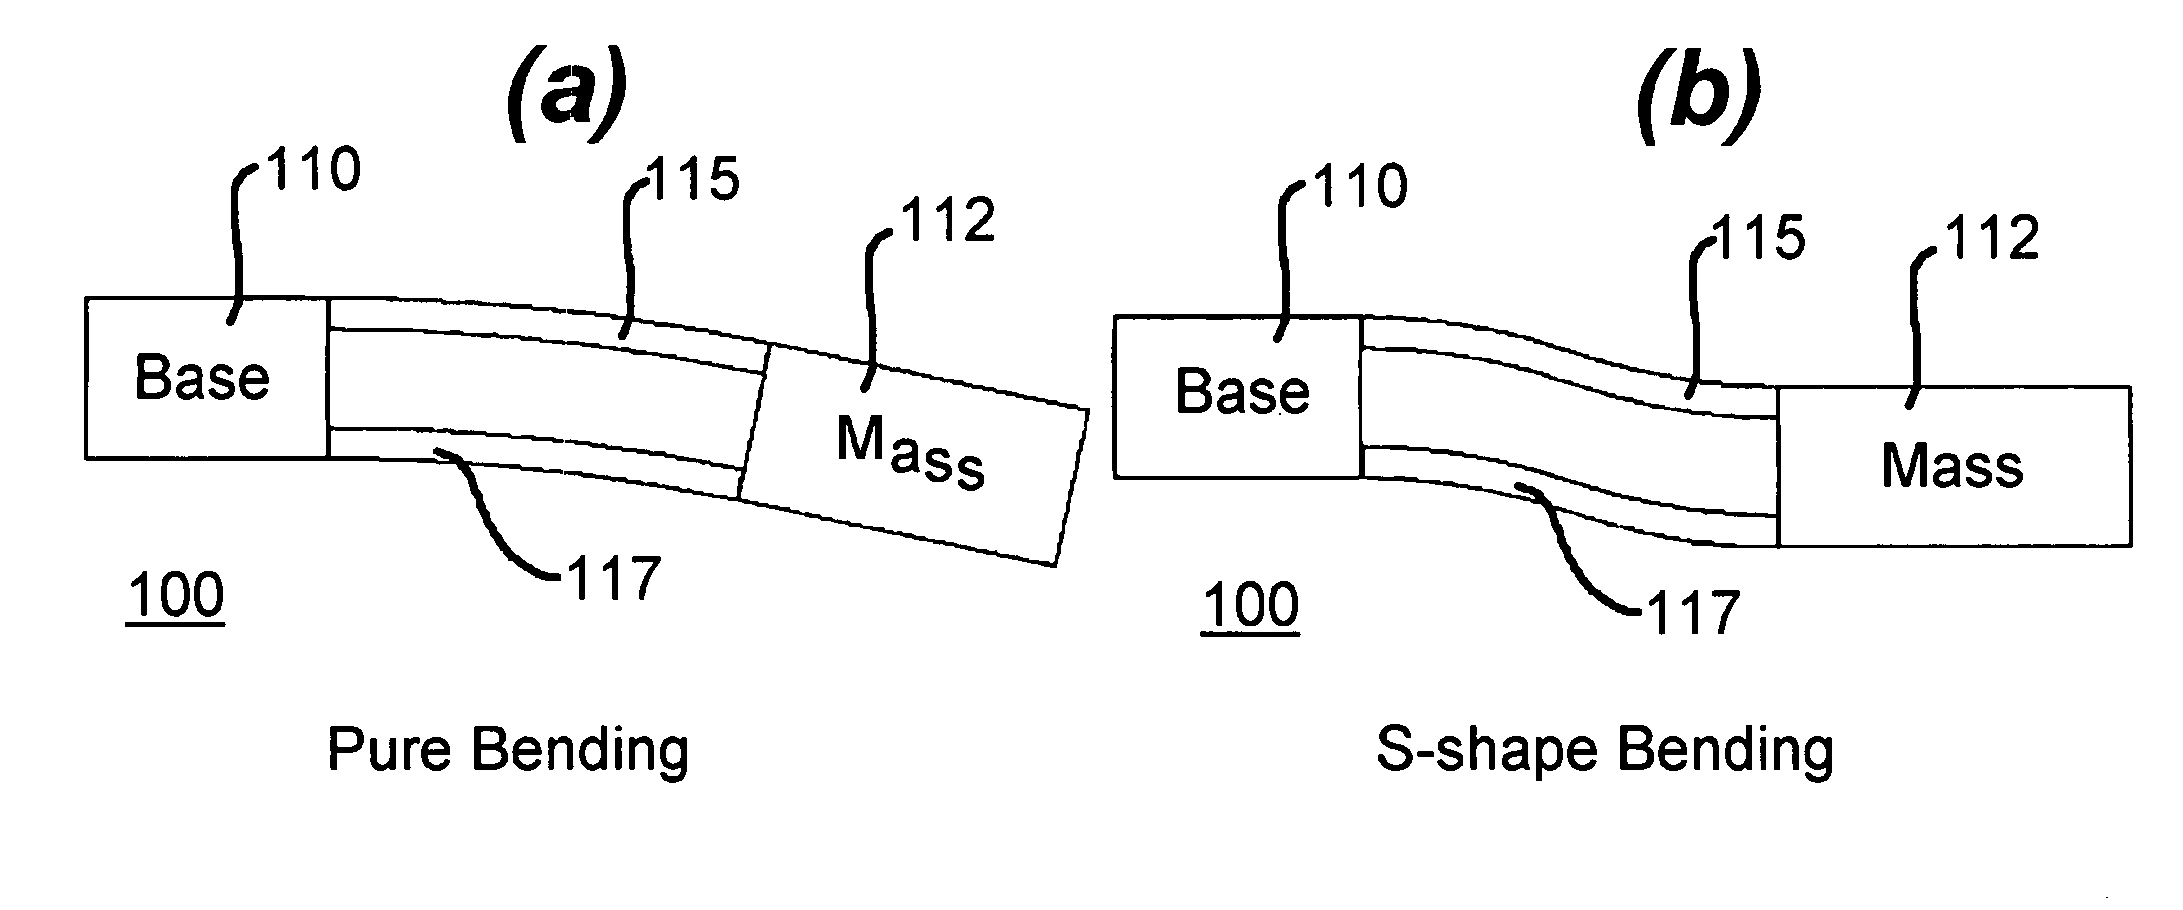 Piezo devices with air-spaced cantilever